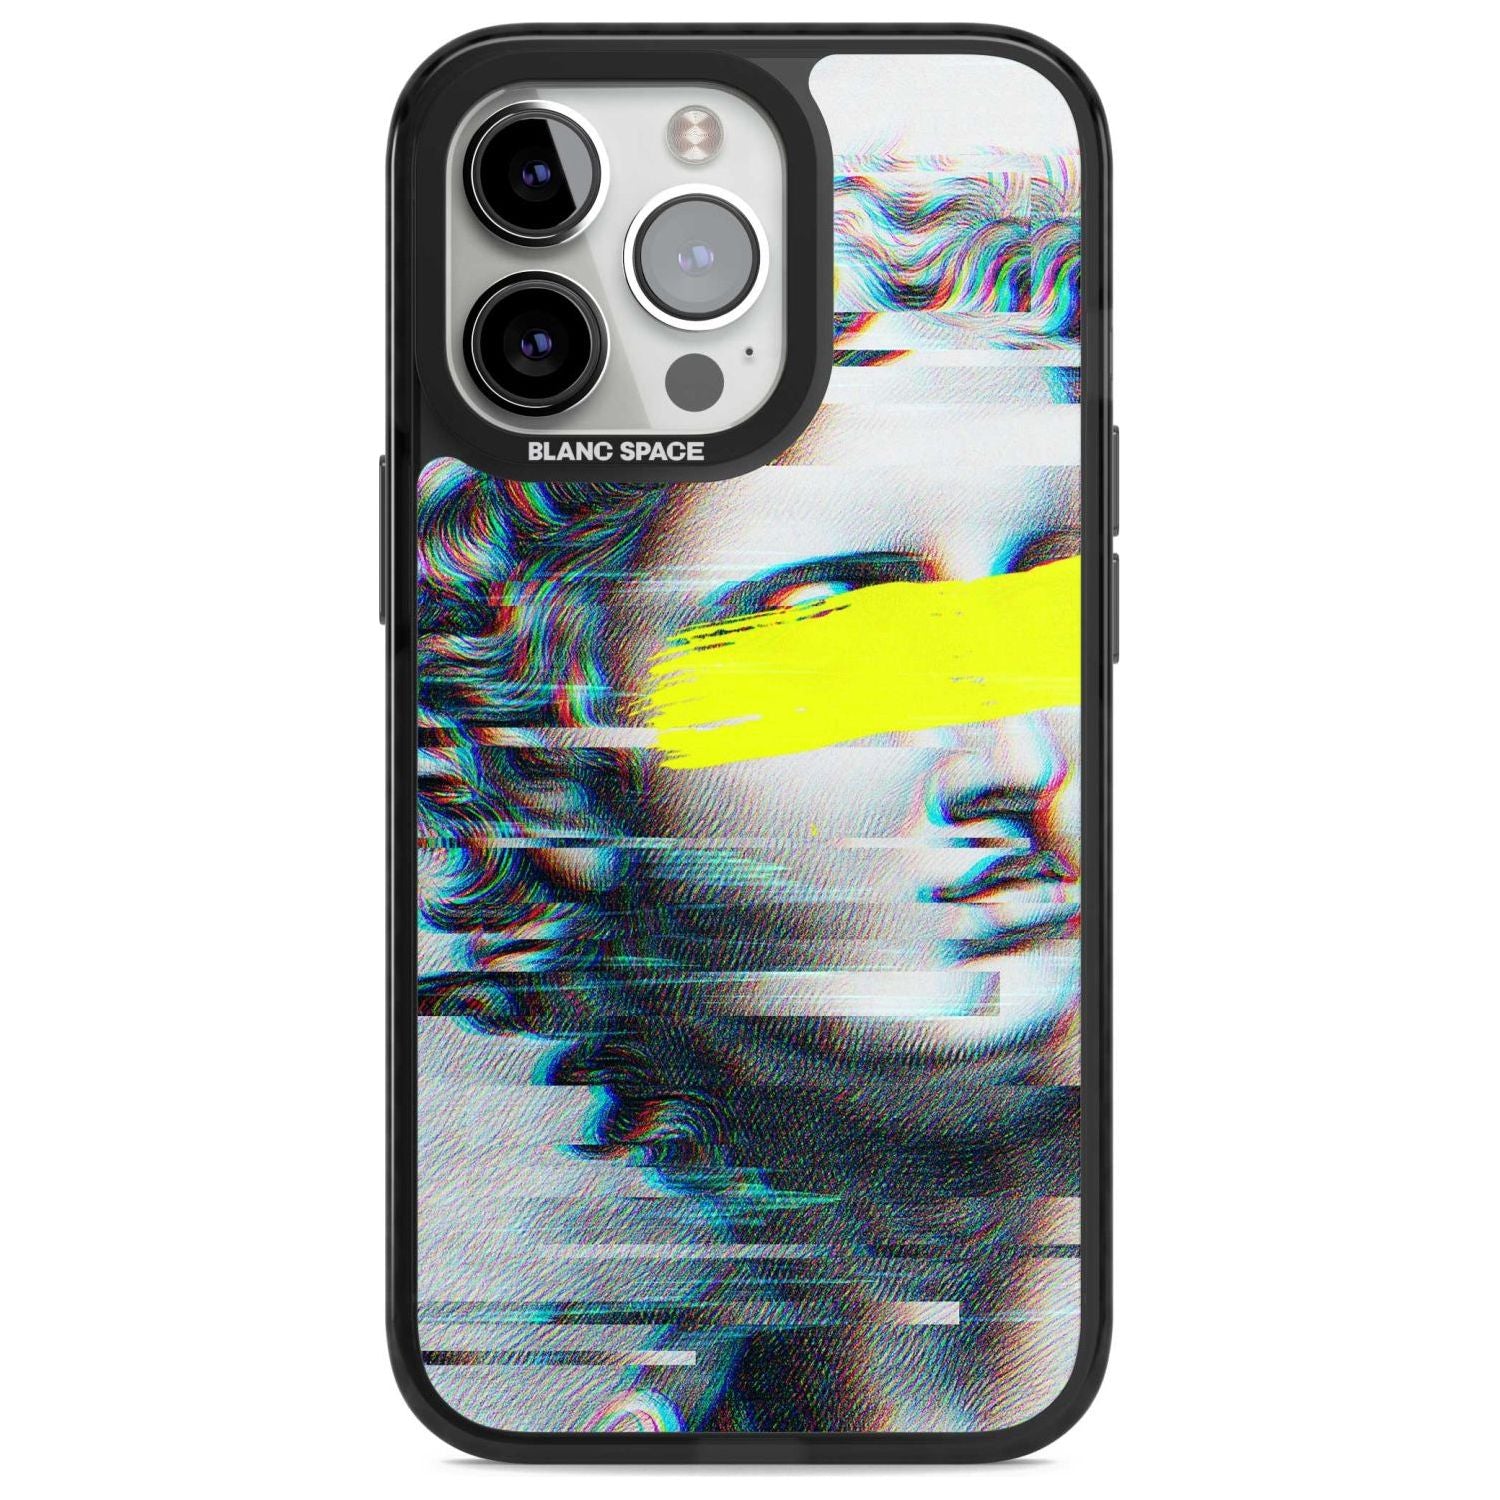 GLITCHED FRAGMENT Phone Case iPhone 15 Pro Max / Magsafe Black Impact Case,iPhone 15 Pro / Magsafe Black Impact Case,iPhone 14 Pro Max / Magsafe Black Impact Case,iPhone 14 Pro / Magsafe Black Impact Case,iPhone 13 Pro / Magsafe Black Impact Case Blanc Space